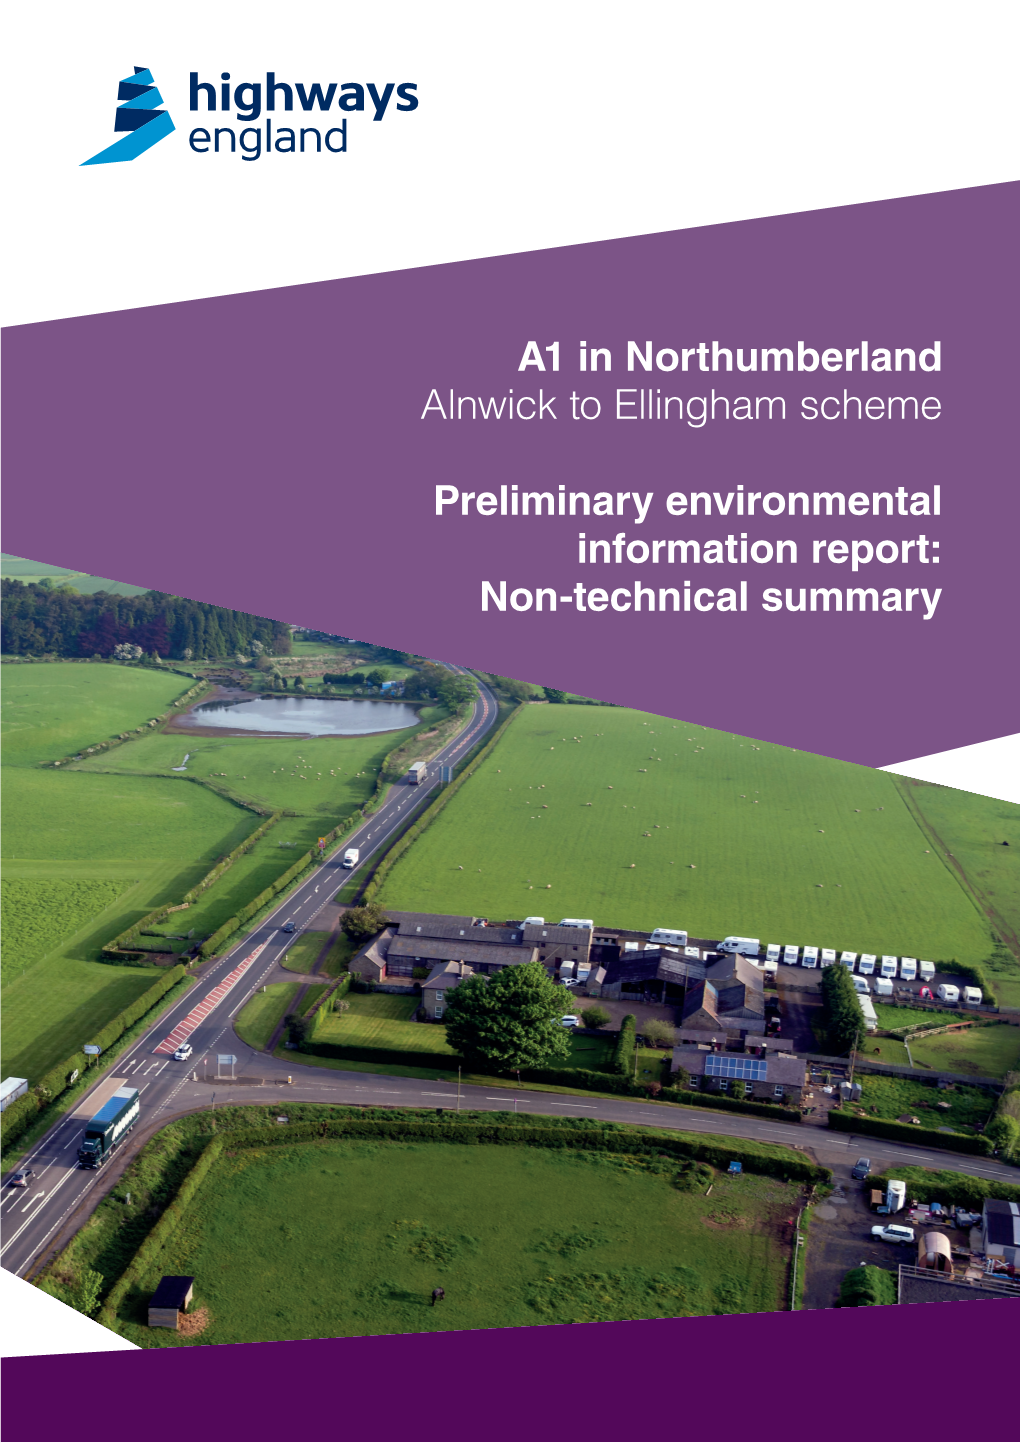 A1 in Northumberland Alnwick to Ellingham Scheme Preliminary